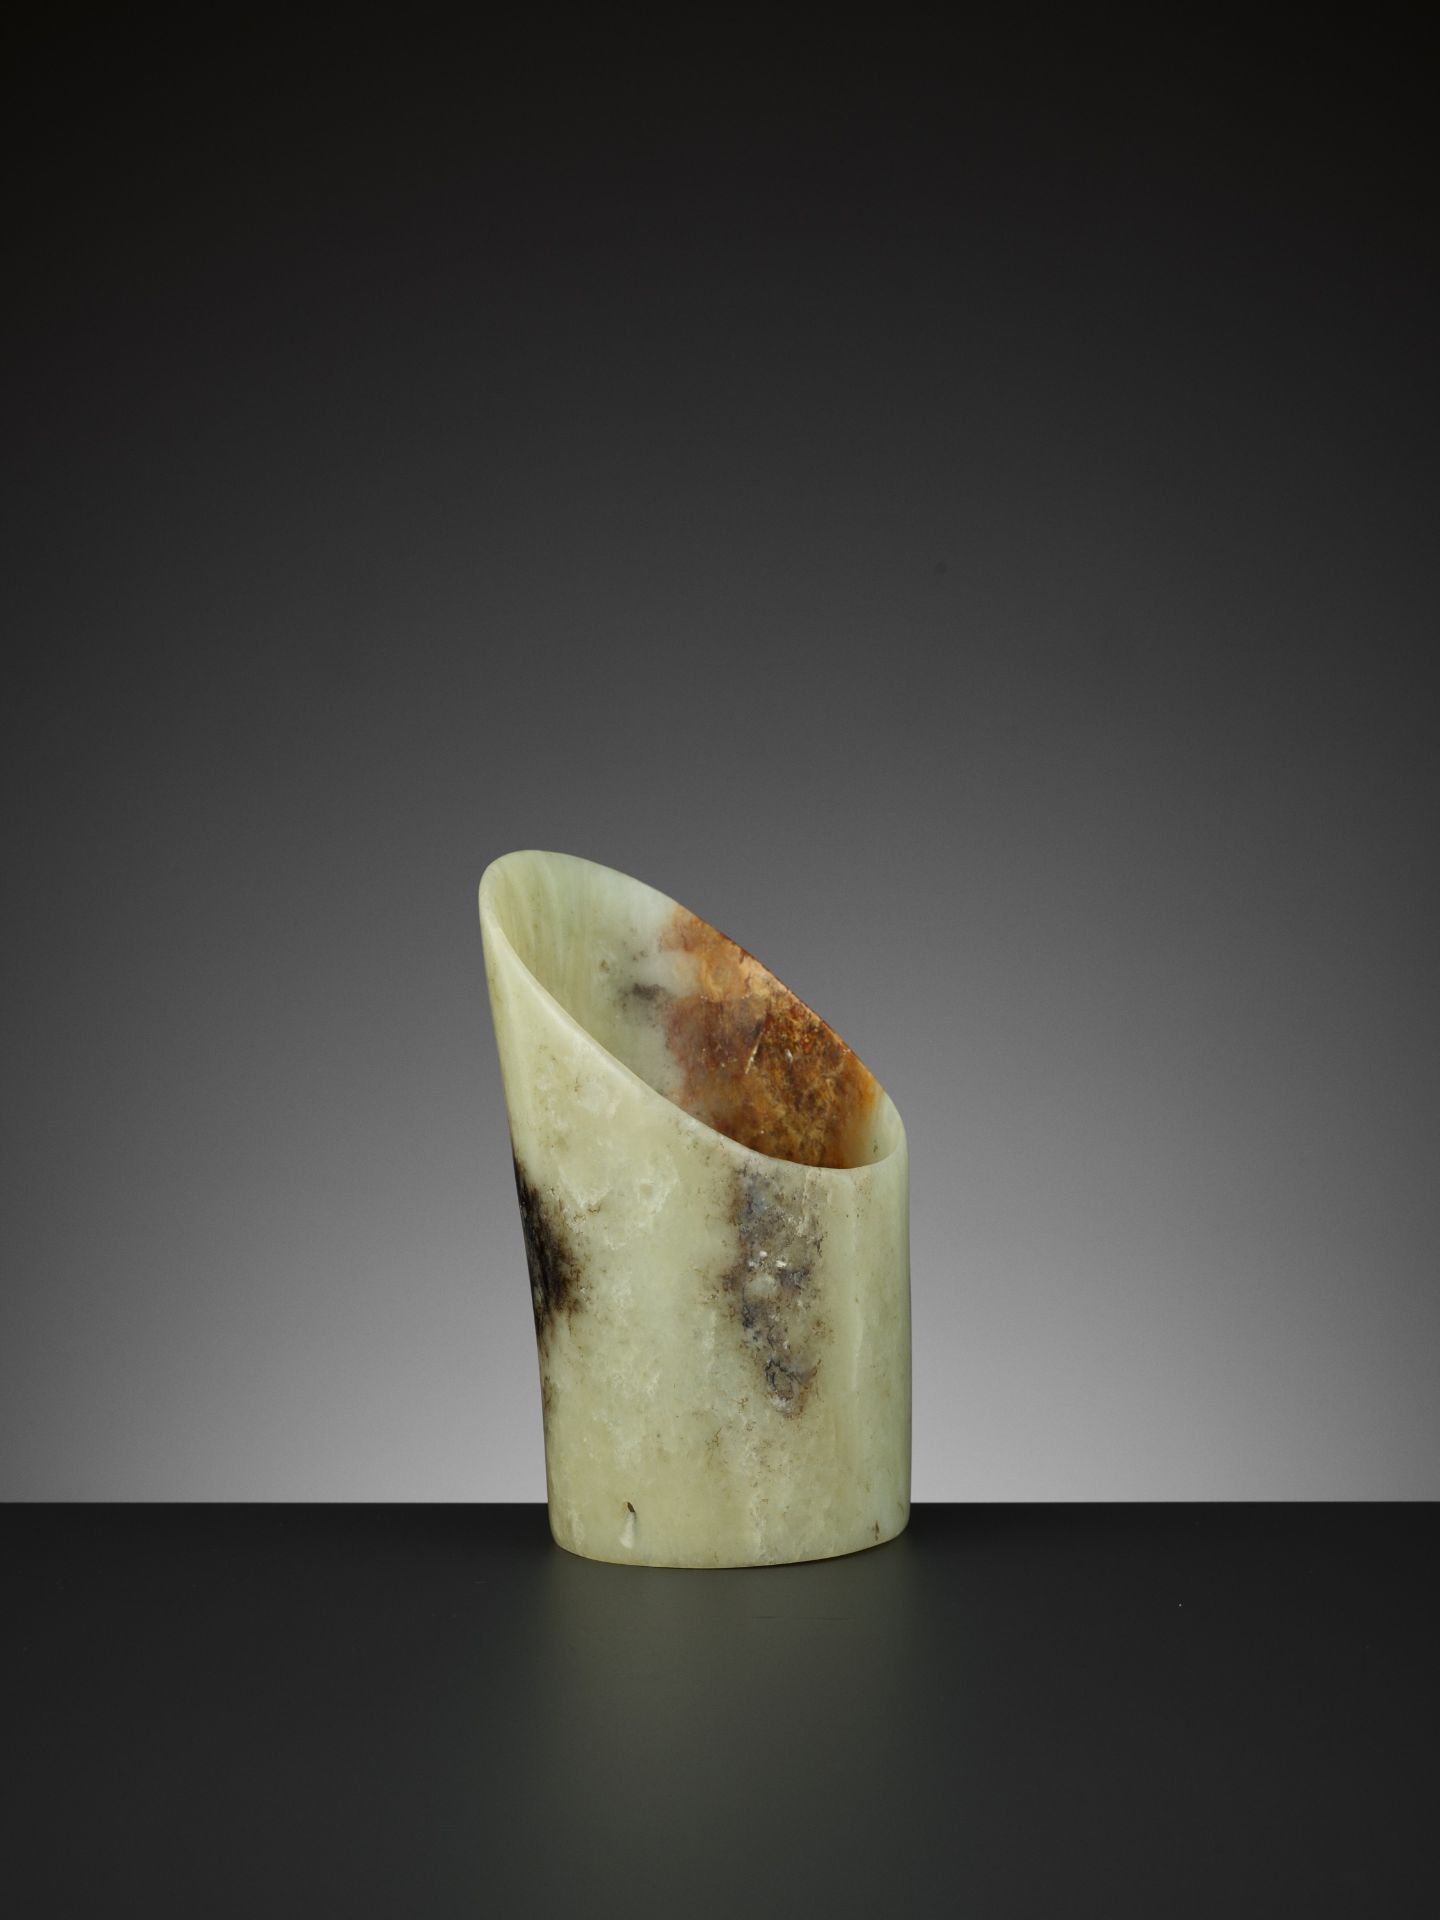 A PALE YELLOW AND RUSSET JADE HOOF-SHAPED ORNAMENT, HONGSHAN - Image 8 of 13